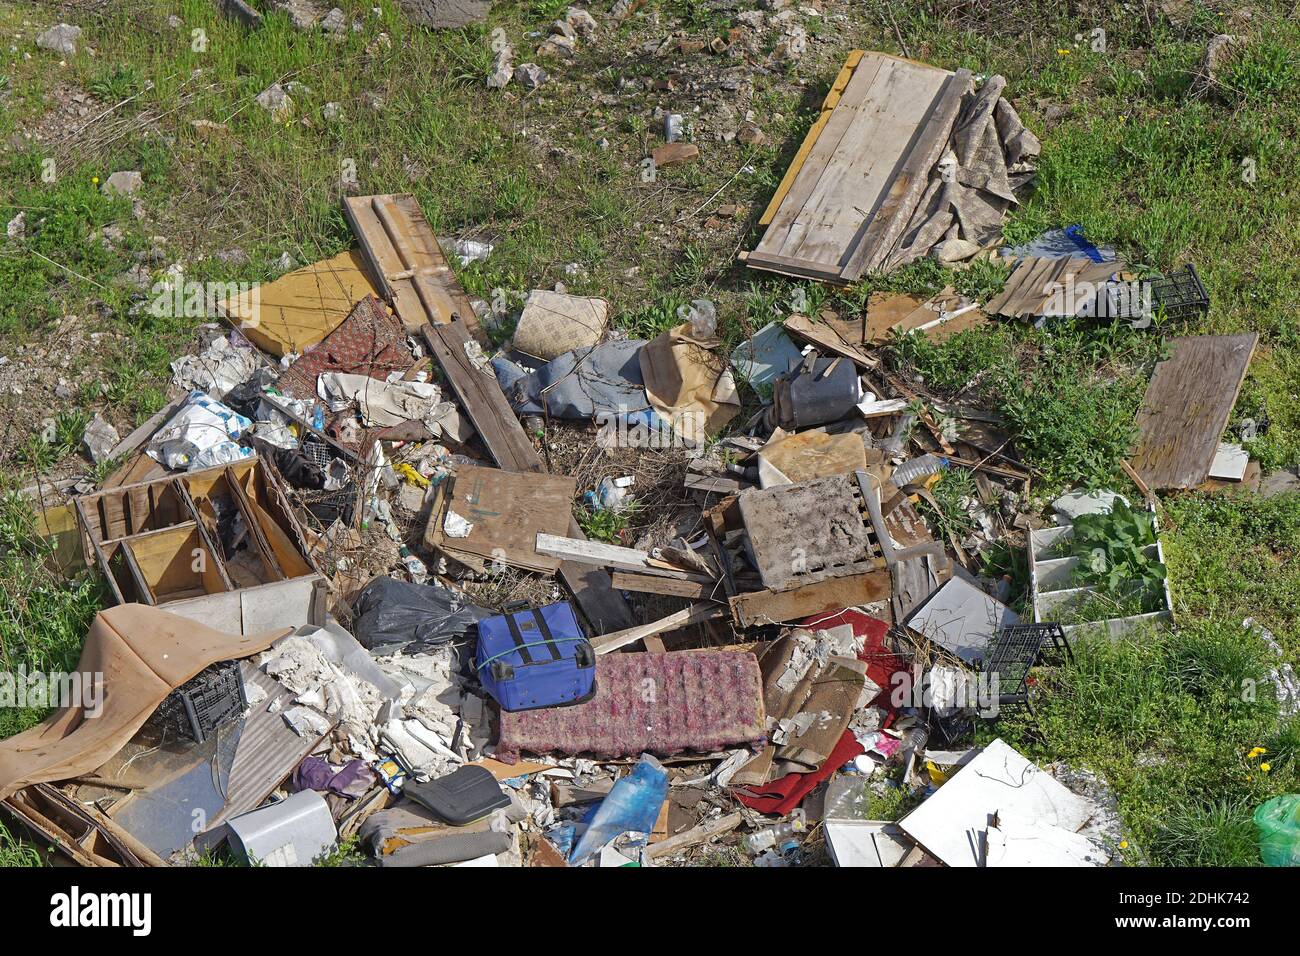 Illegal dumping garbage and trash at field Stock Photo